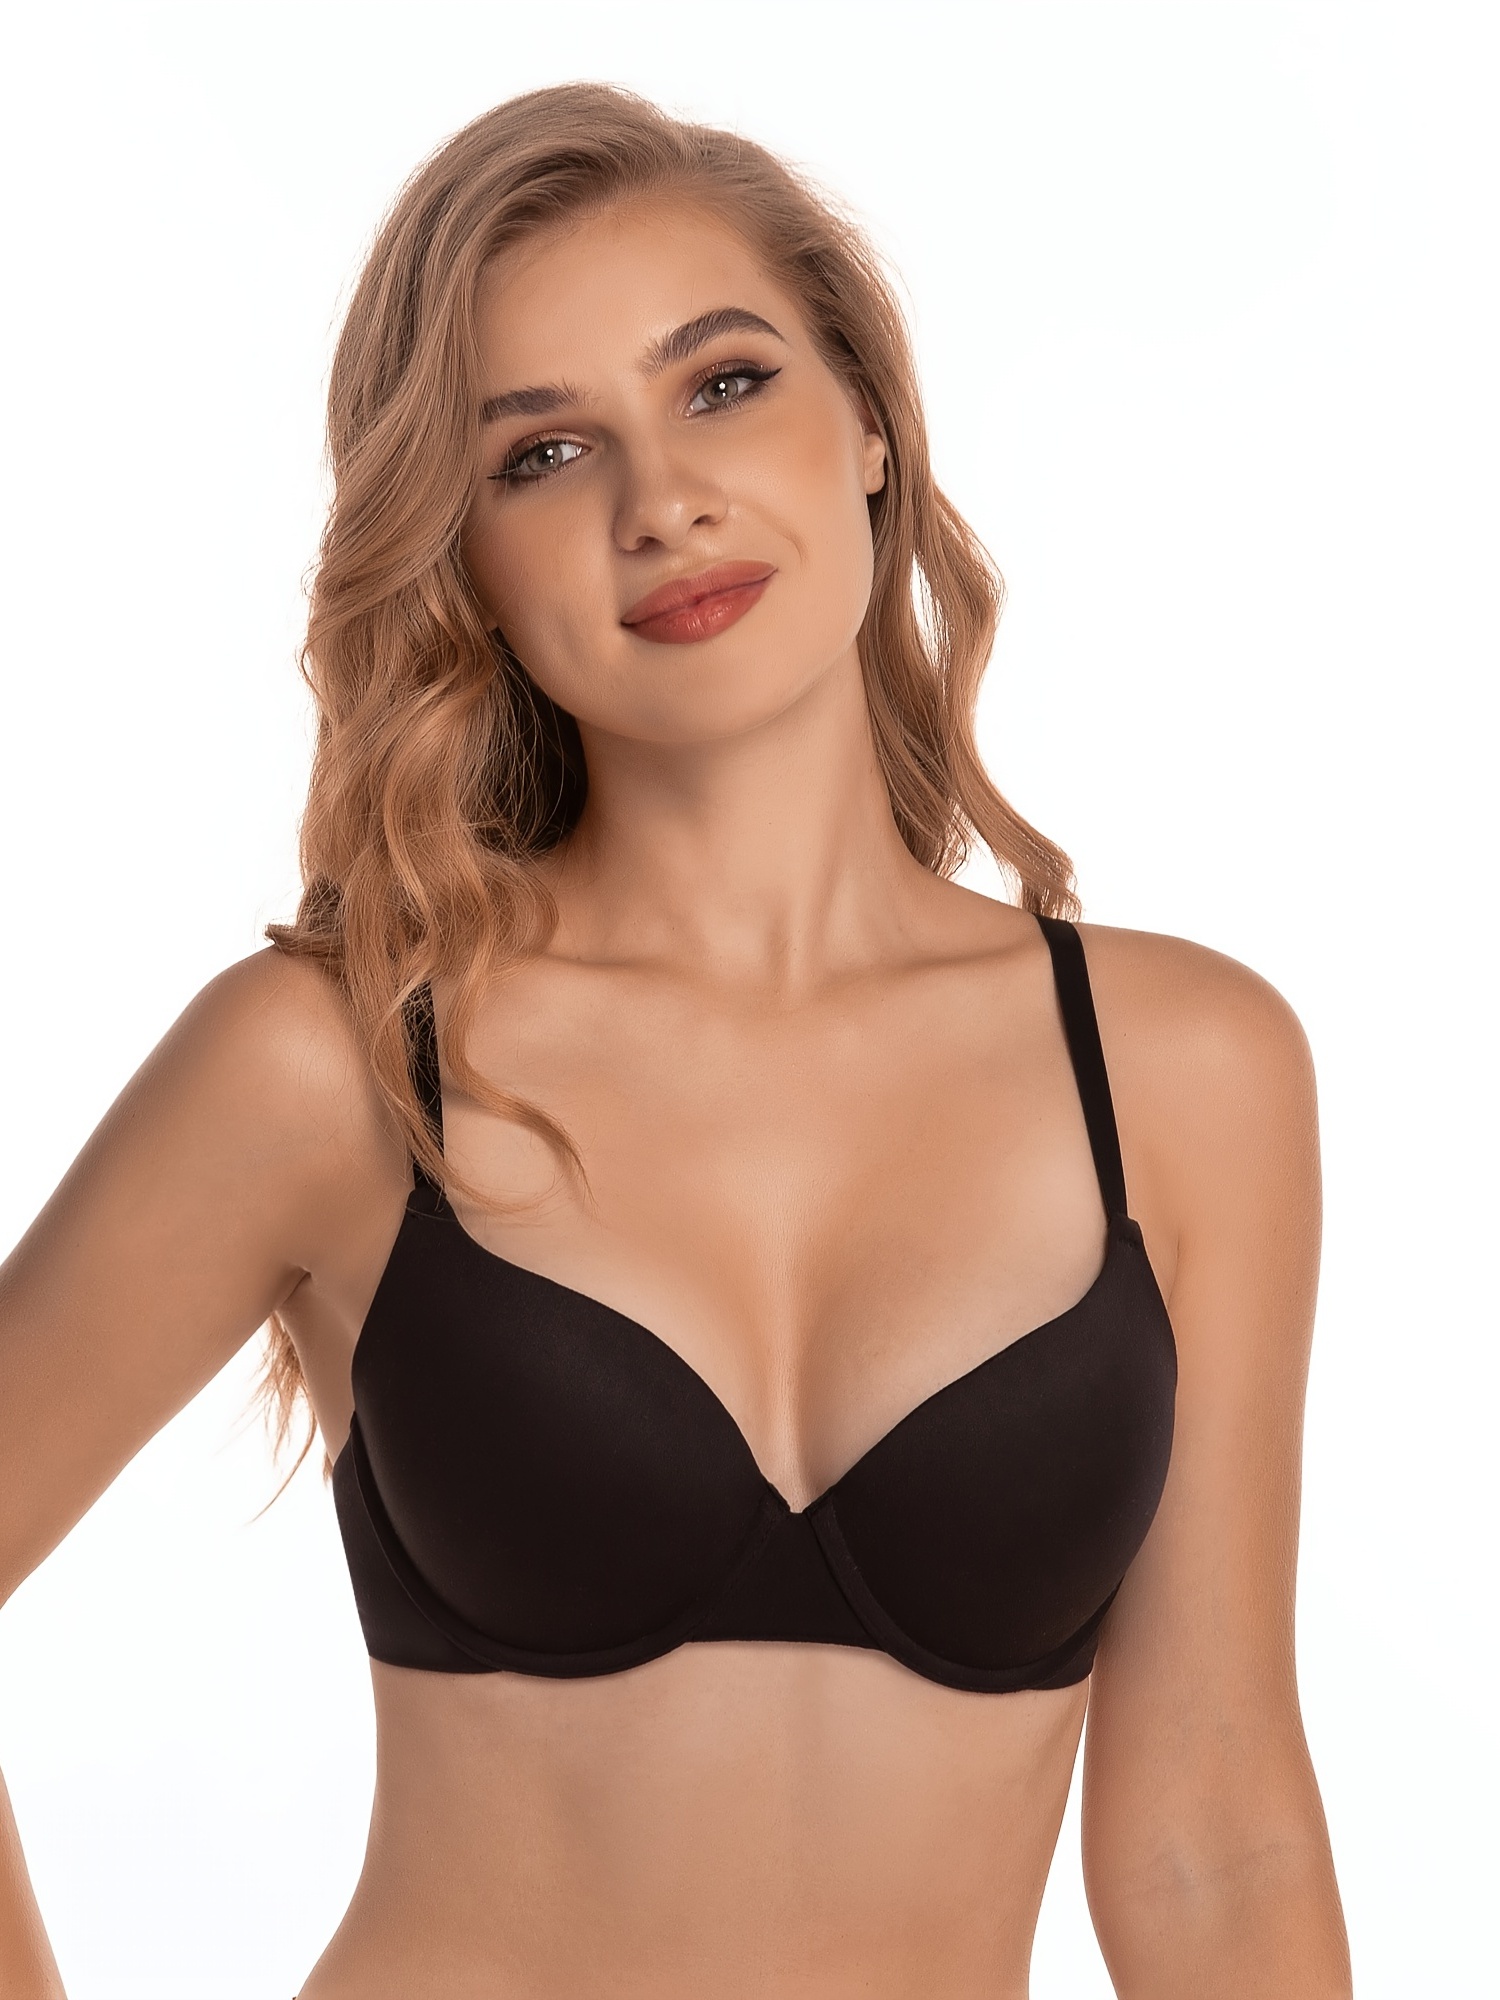 Bras for Women No Underwire Comfortable Push Up Deep V Neck Bras